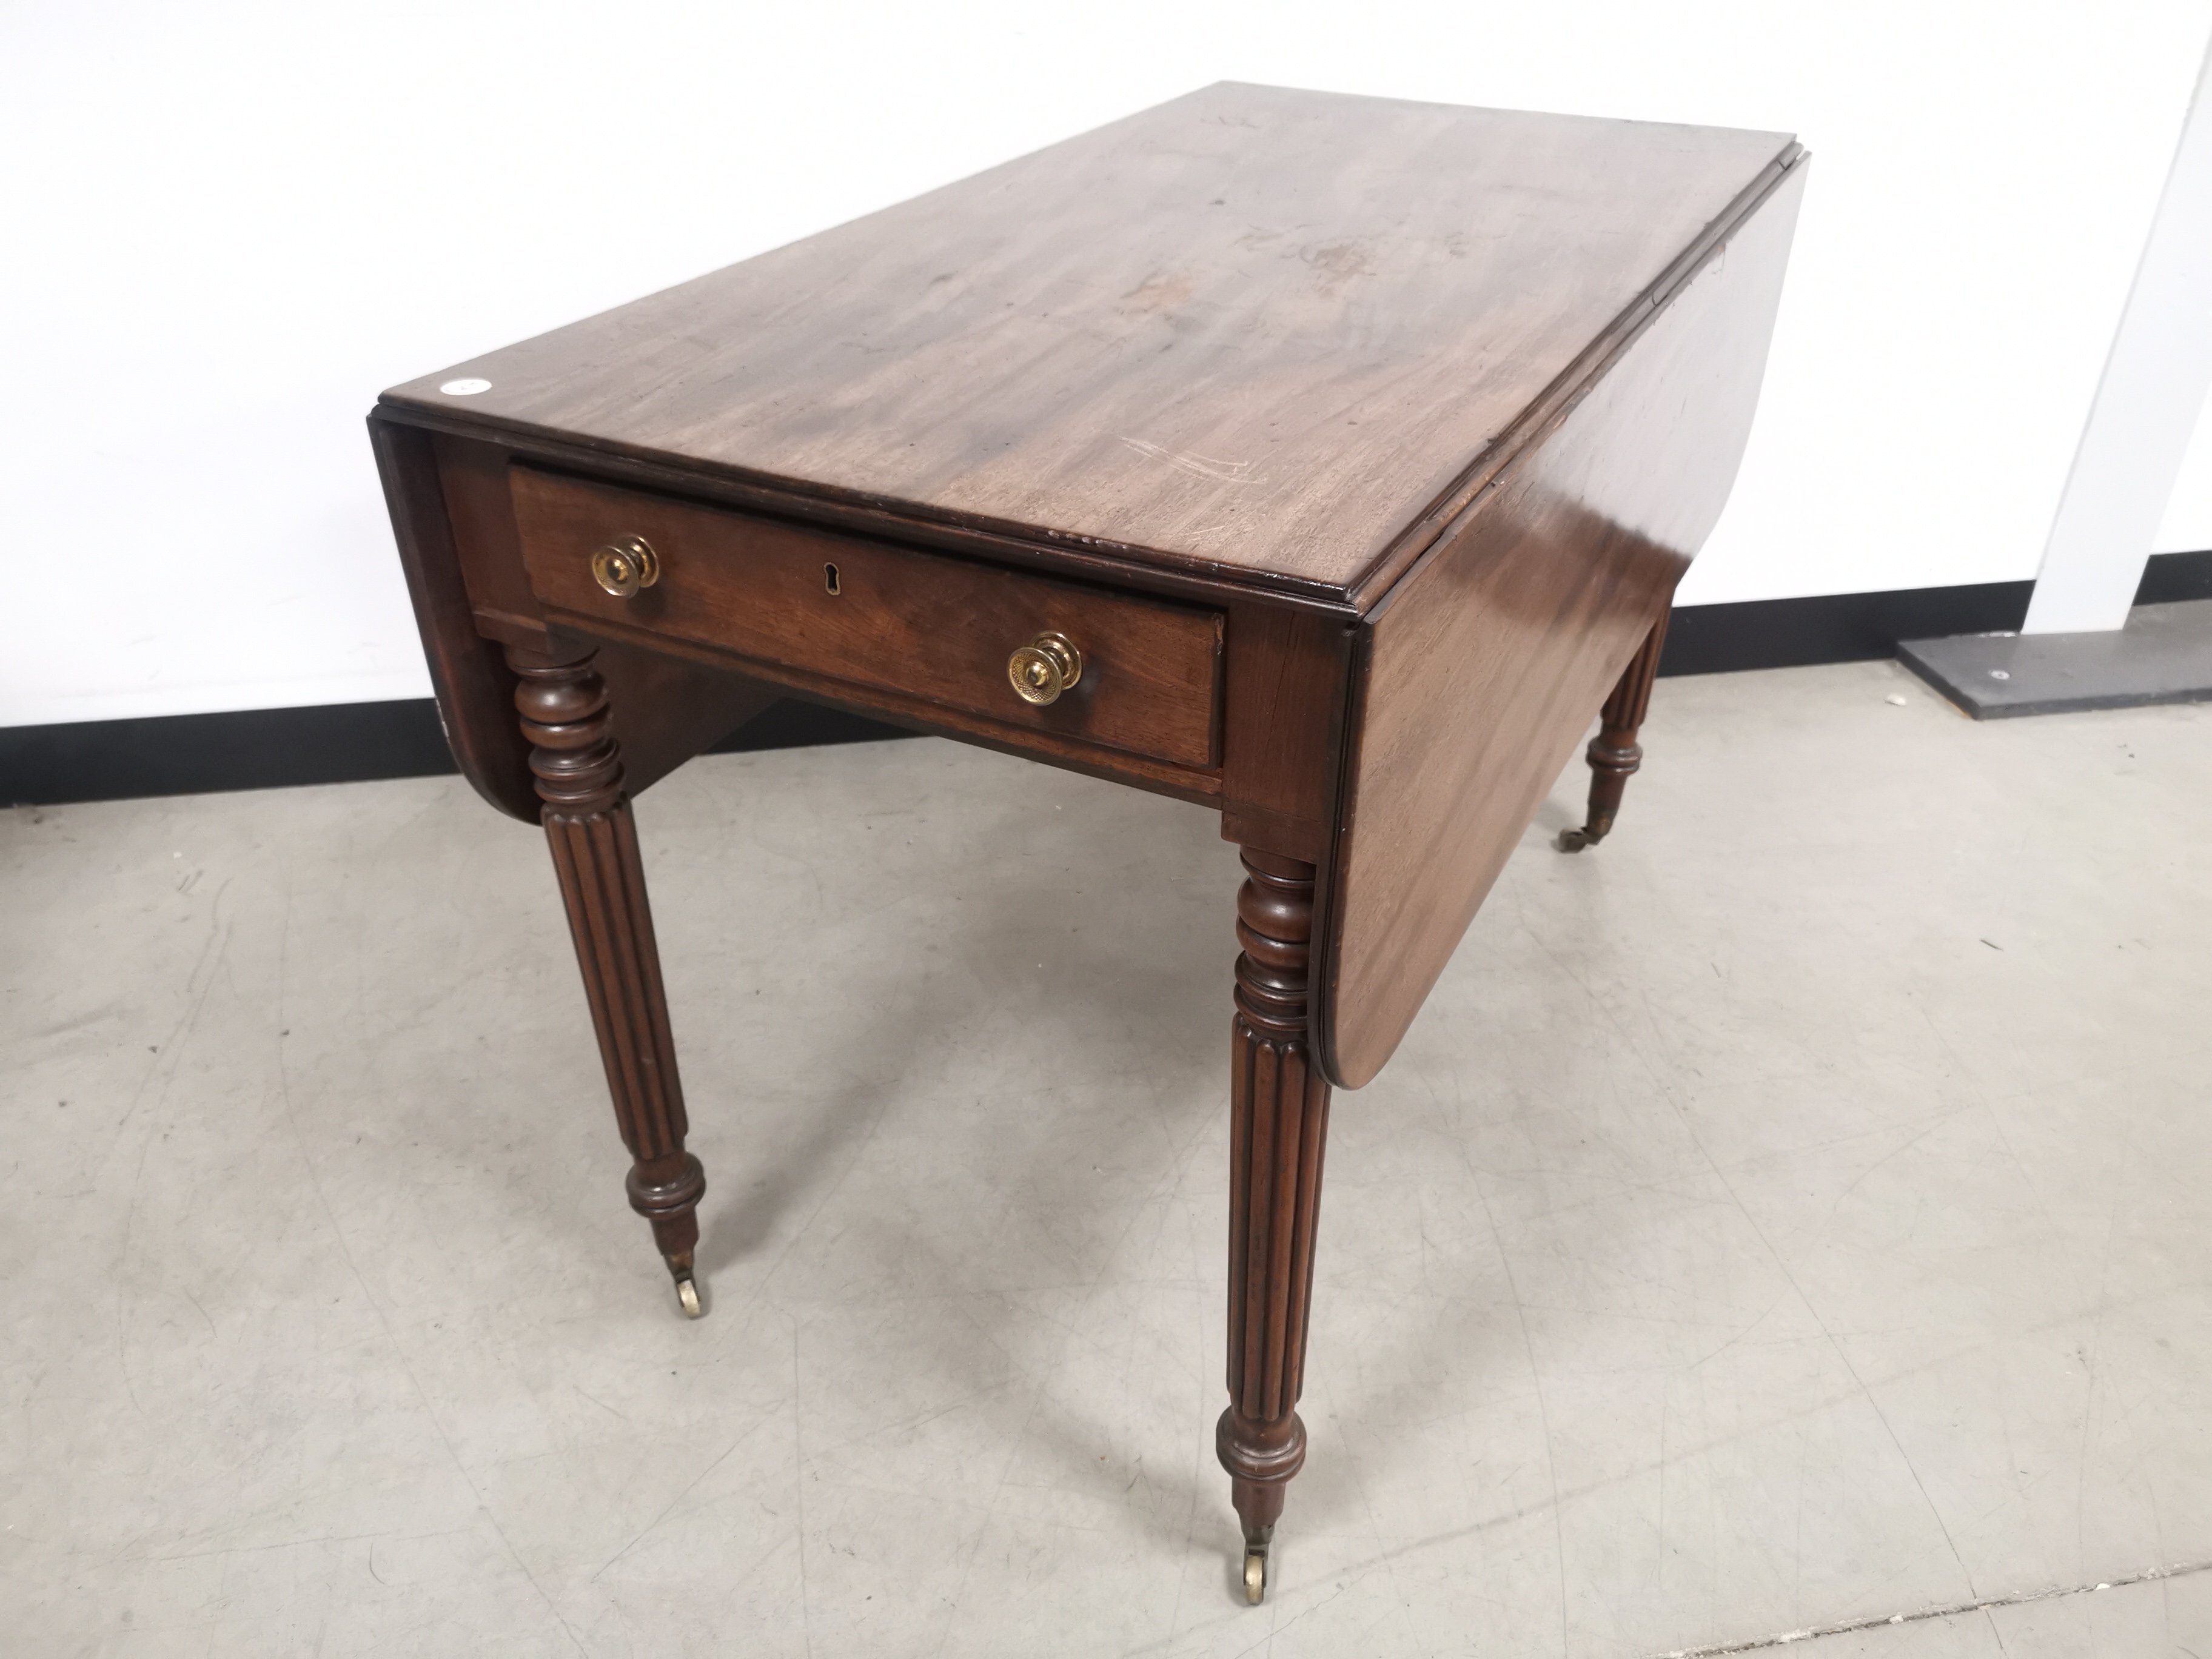 Mahgonay drop leaf table, Reed supports set on castors, drawer to one end, dummy drawer to the